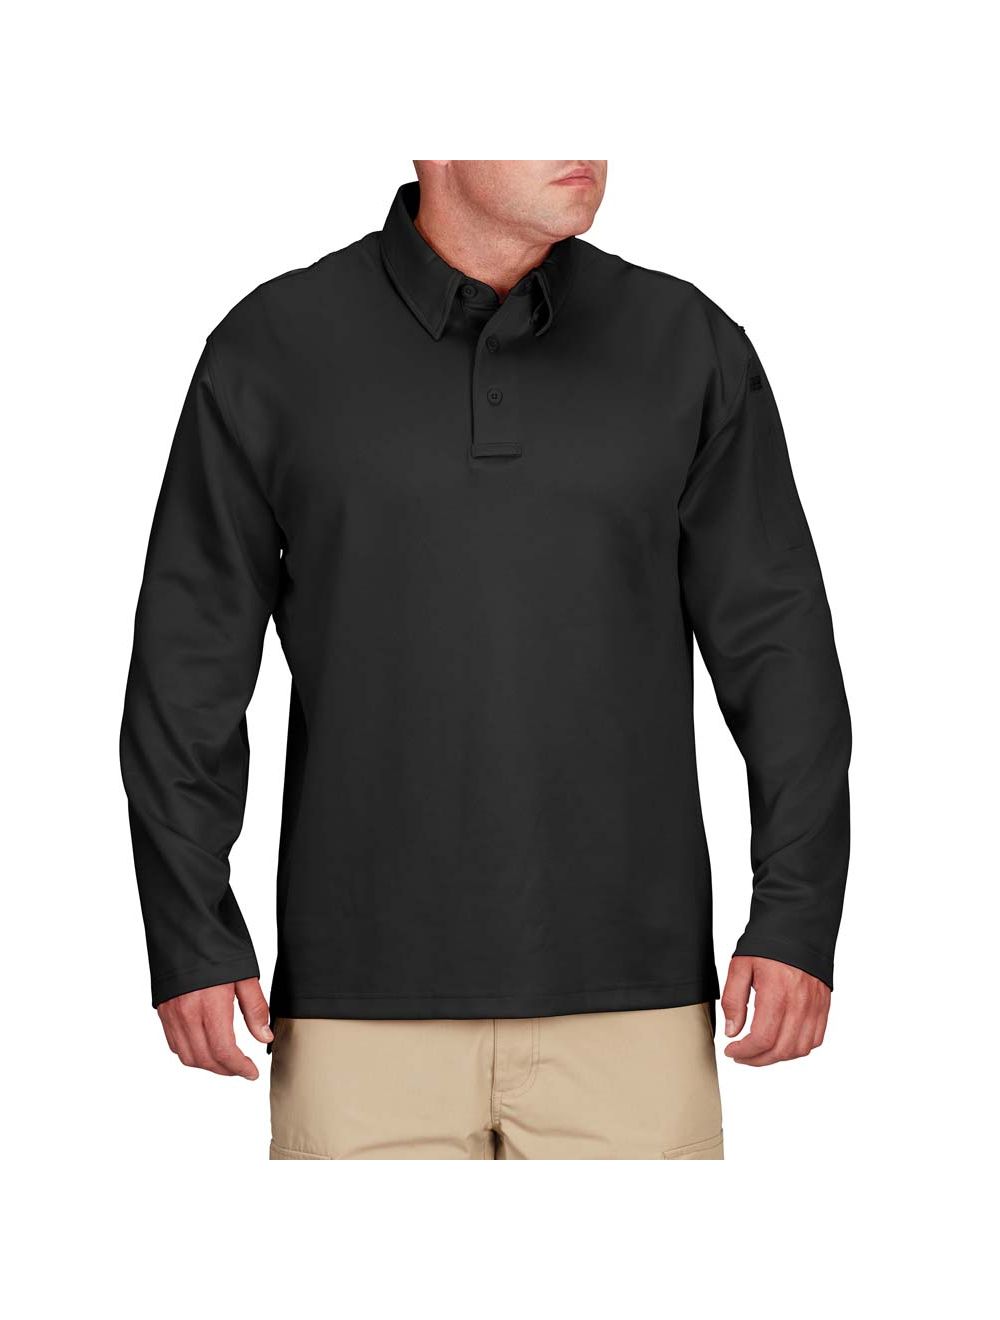 Men's PROPPER ICE™ Performance Long Sleeve Polo